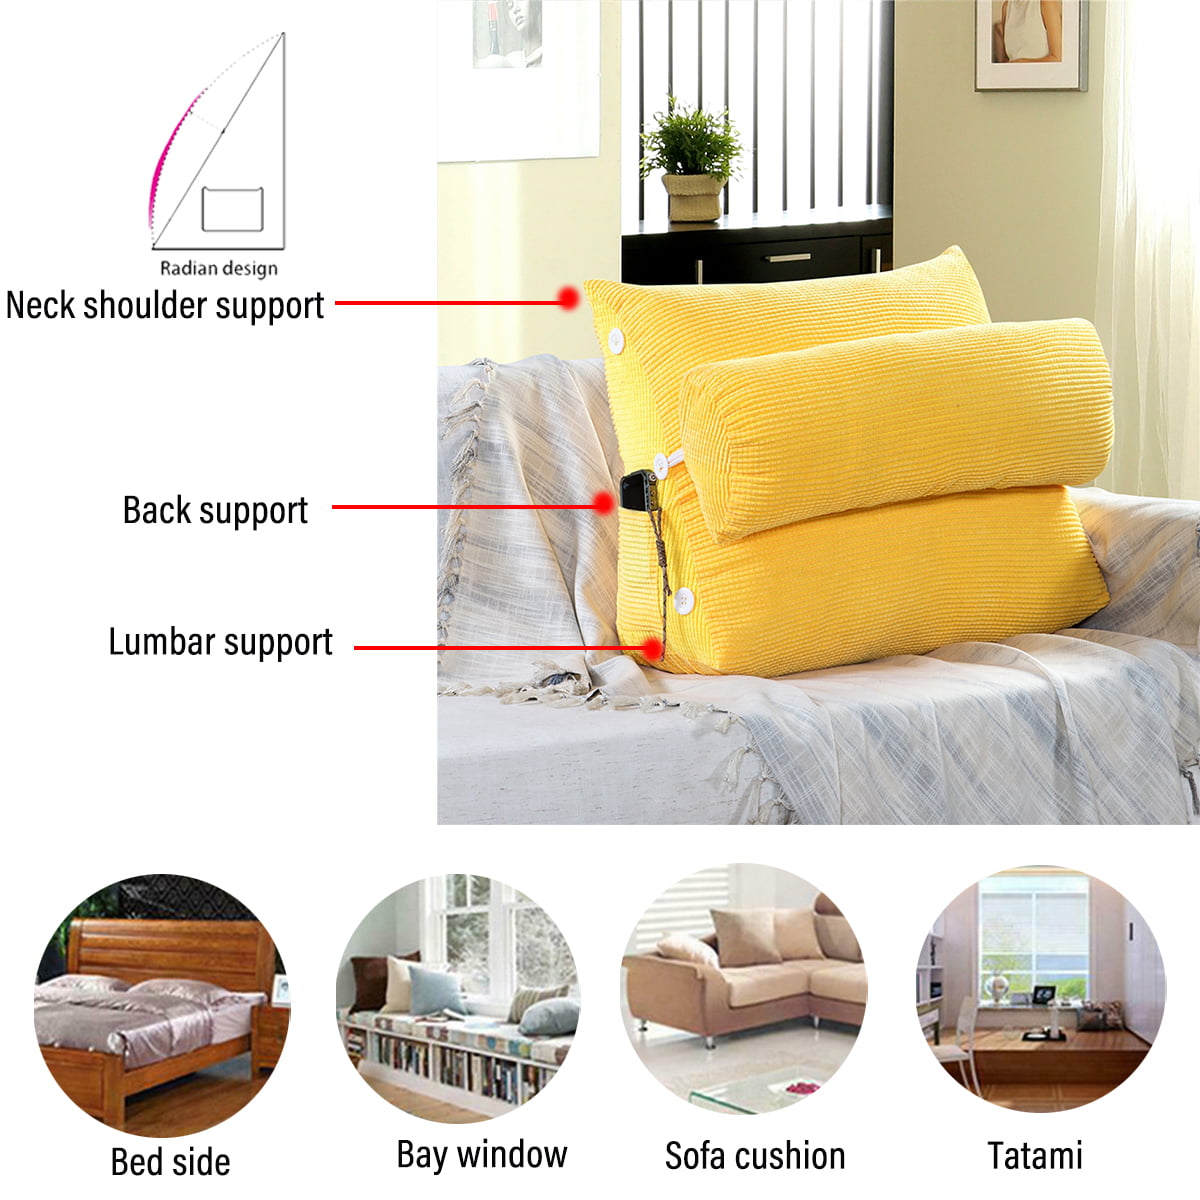 Ideal for Chair,Car Seat Lumbar Support Wedge Pillow for Lower Back Pain Relief Washable Butterfly Design Lumbar Support Bed Pillow YASUOA Ergonomic Memory Foam Sleeping Back Support Waist Pillow